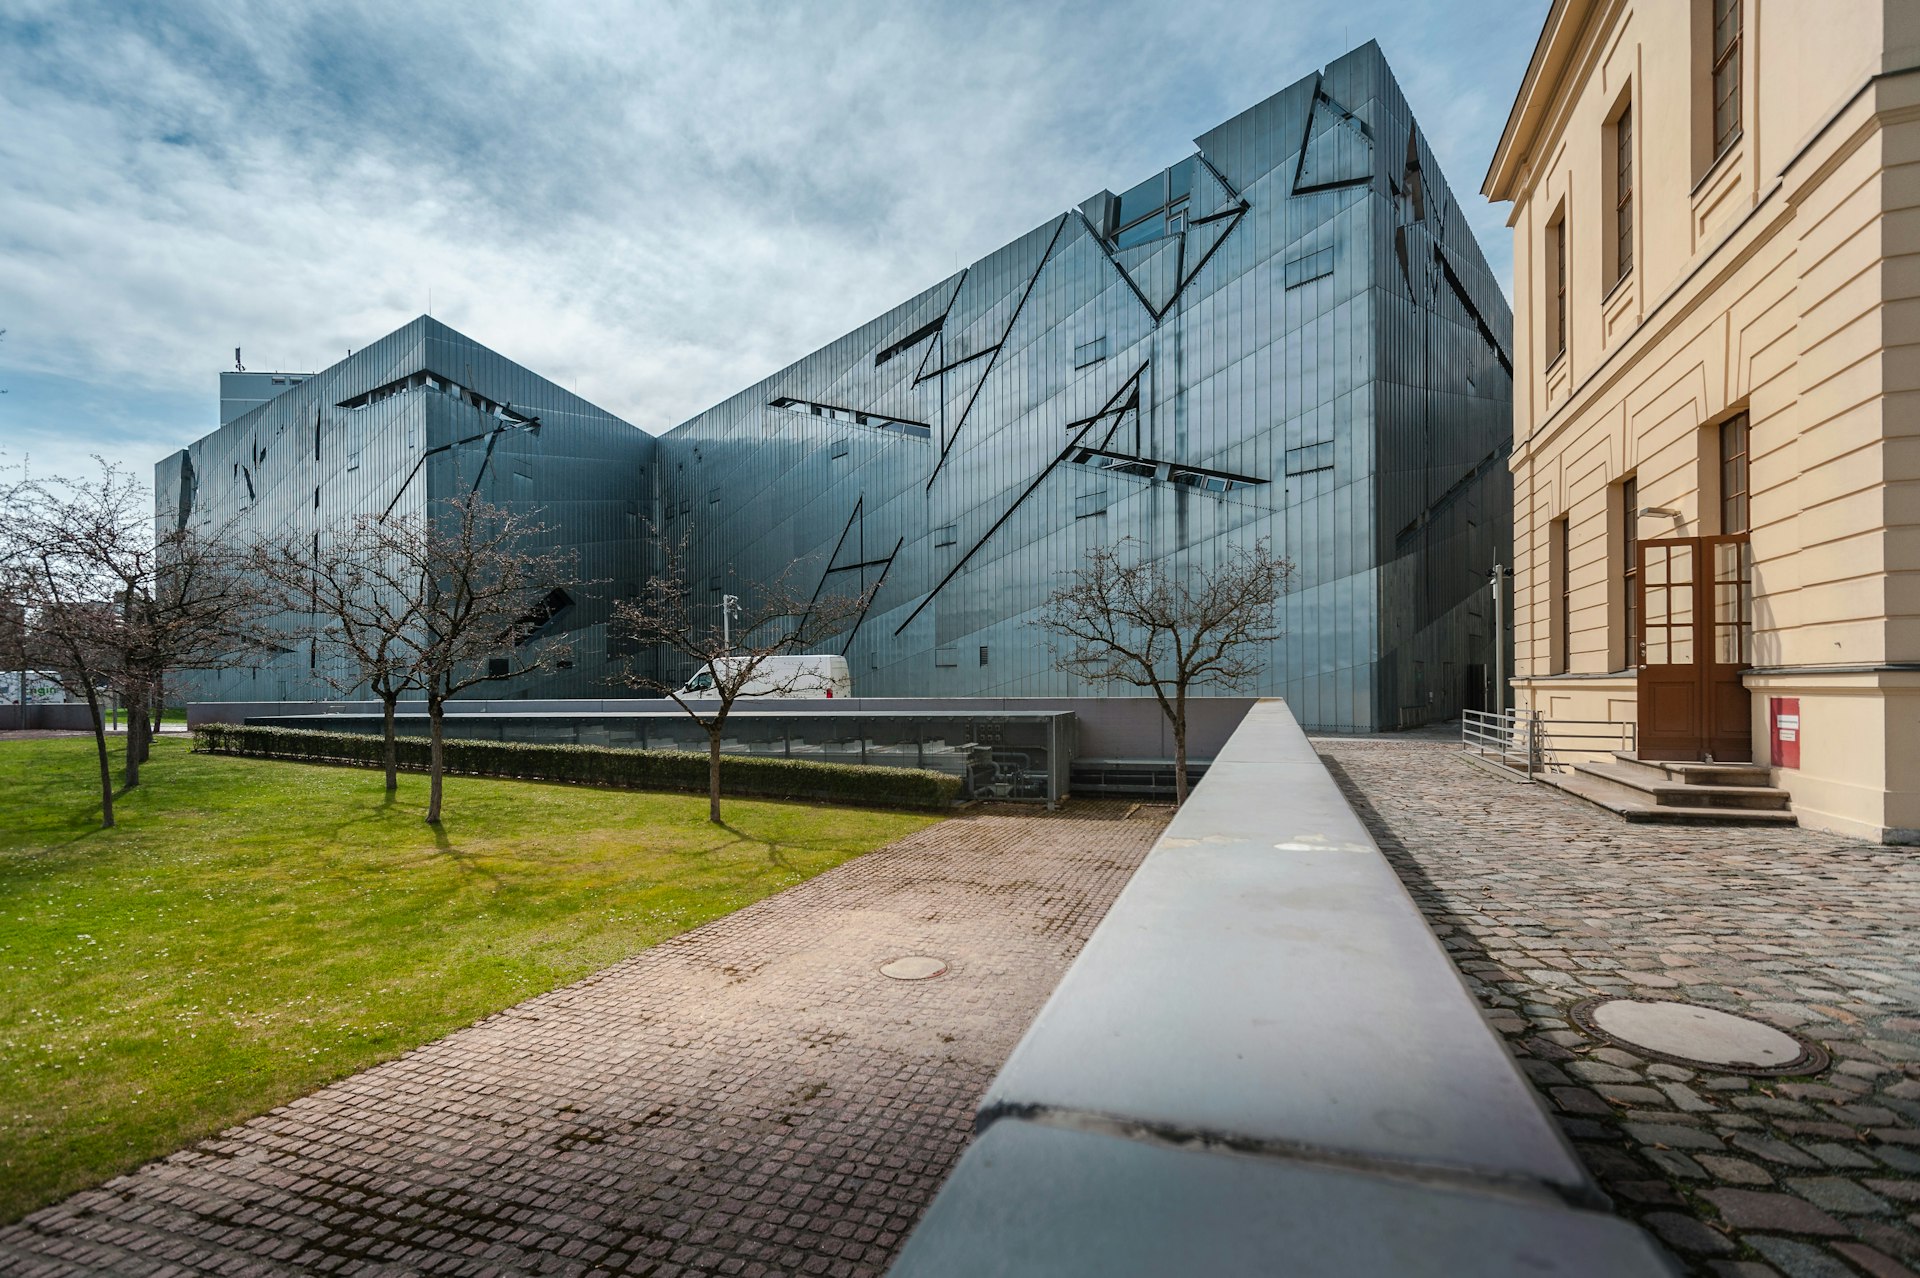 The baroque palace and new wing by Daniel Libeskind of the Jewish Museum Berlin